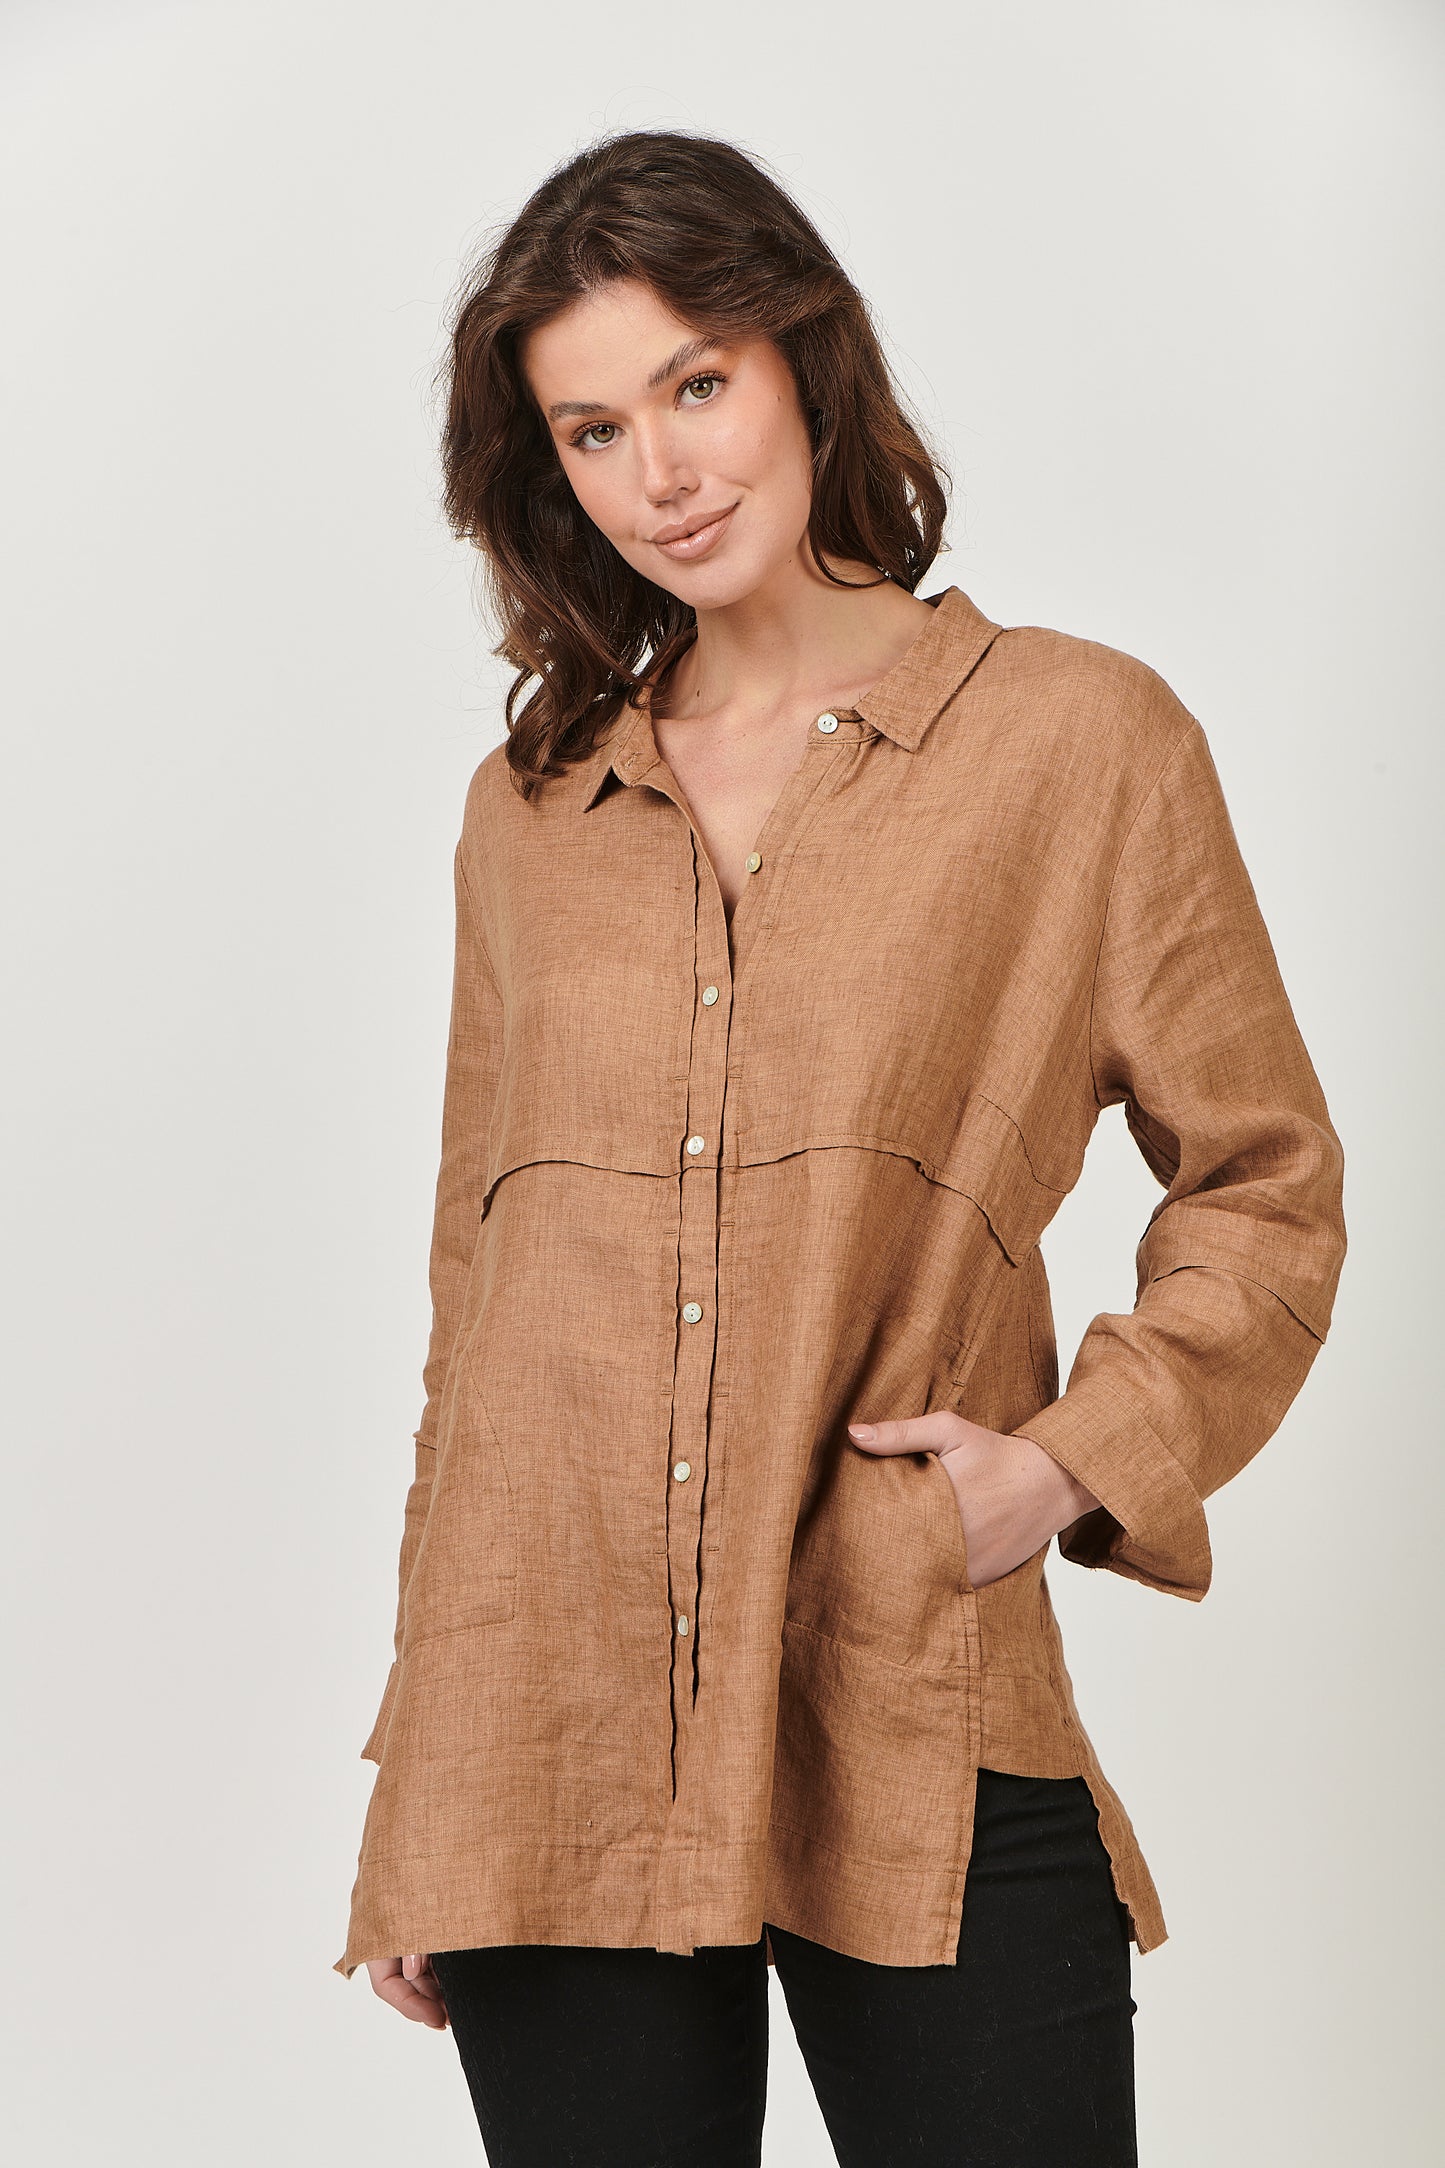 Naturals by O & J Linen Shirt in Chai front button up